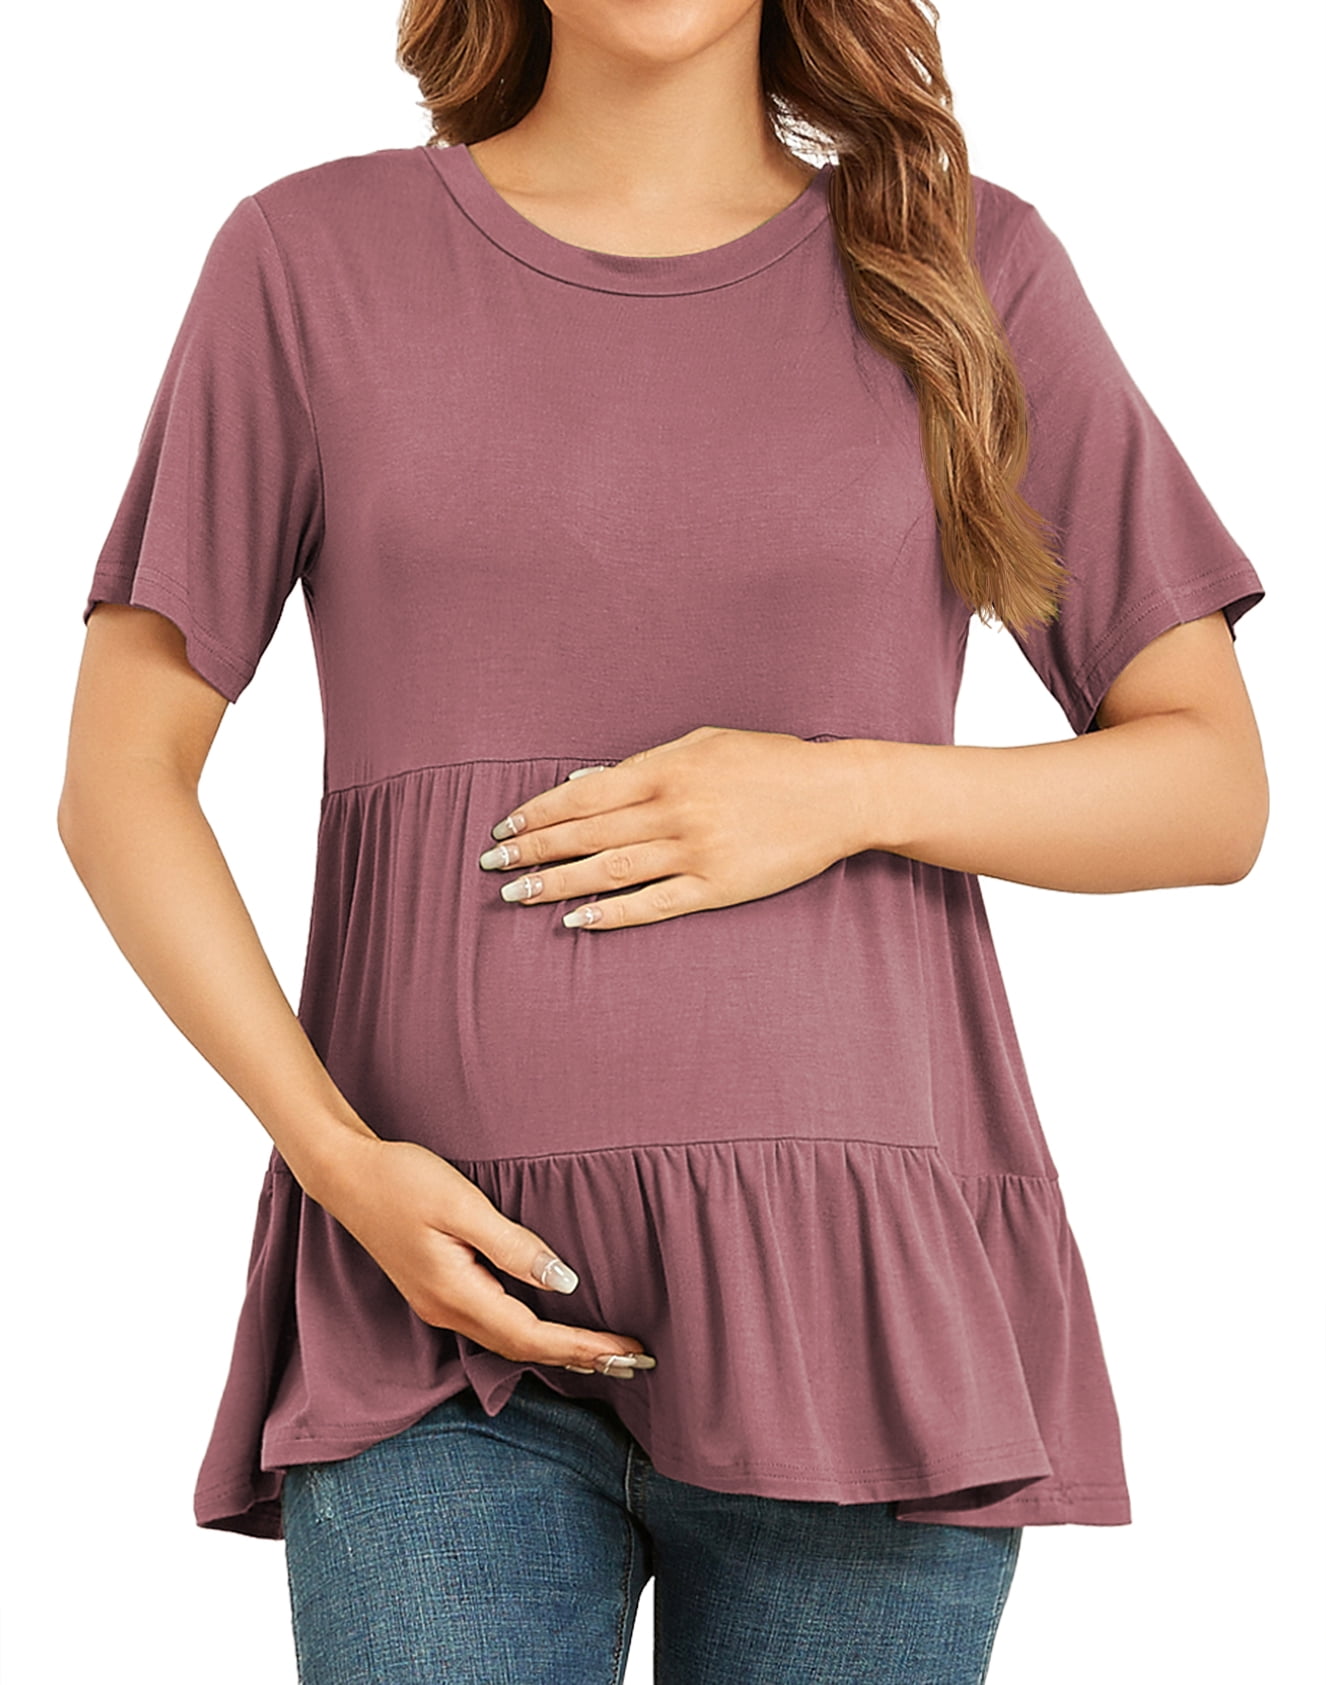 New MATERNITY V NECK TOP Pregnancy Clothing Wear Size 8 10 12 14 16 18 Tops 5104 